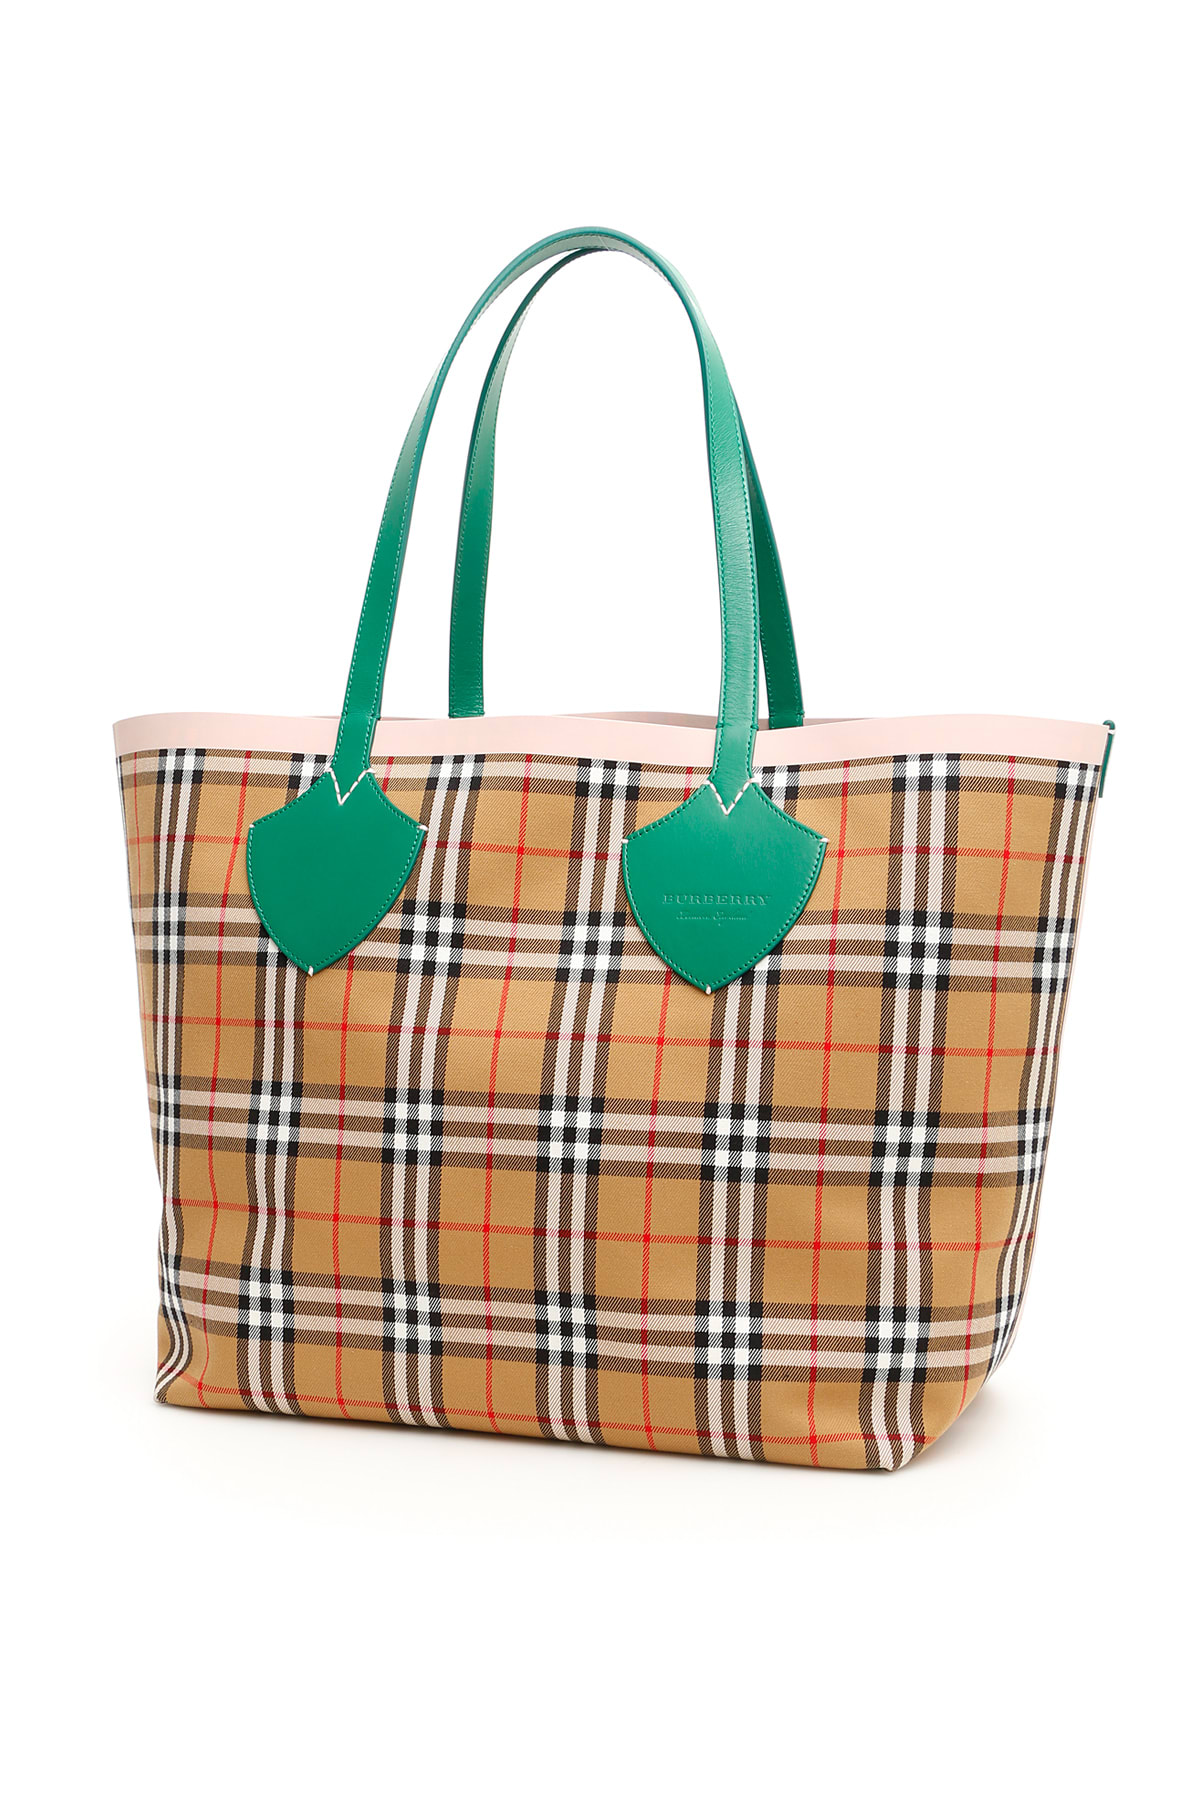 Burberry Burberry The Giant Reversible Tote Bag - PALM GRN PINK APRICT (Green) - 10954521 | italist